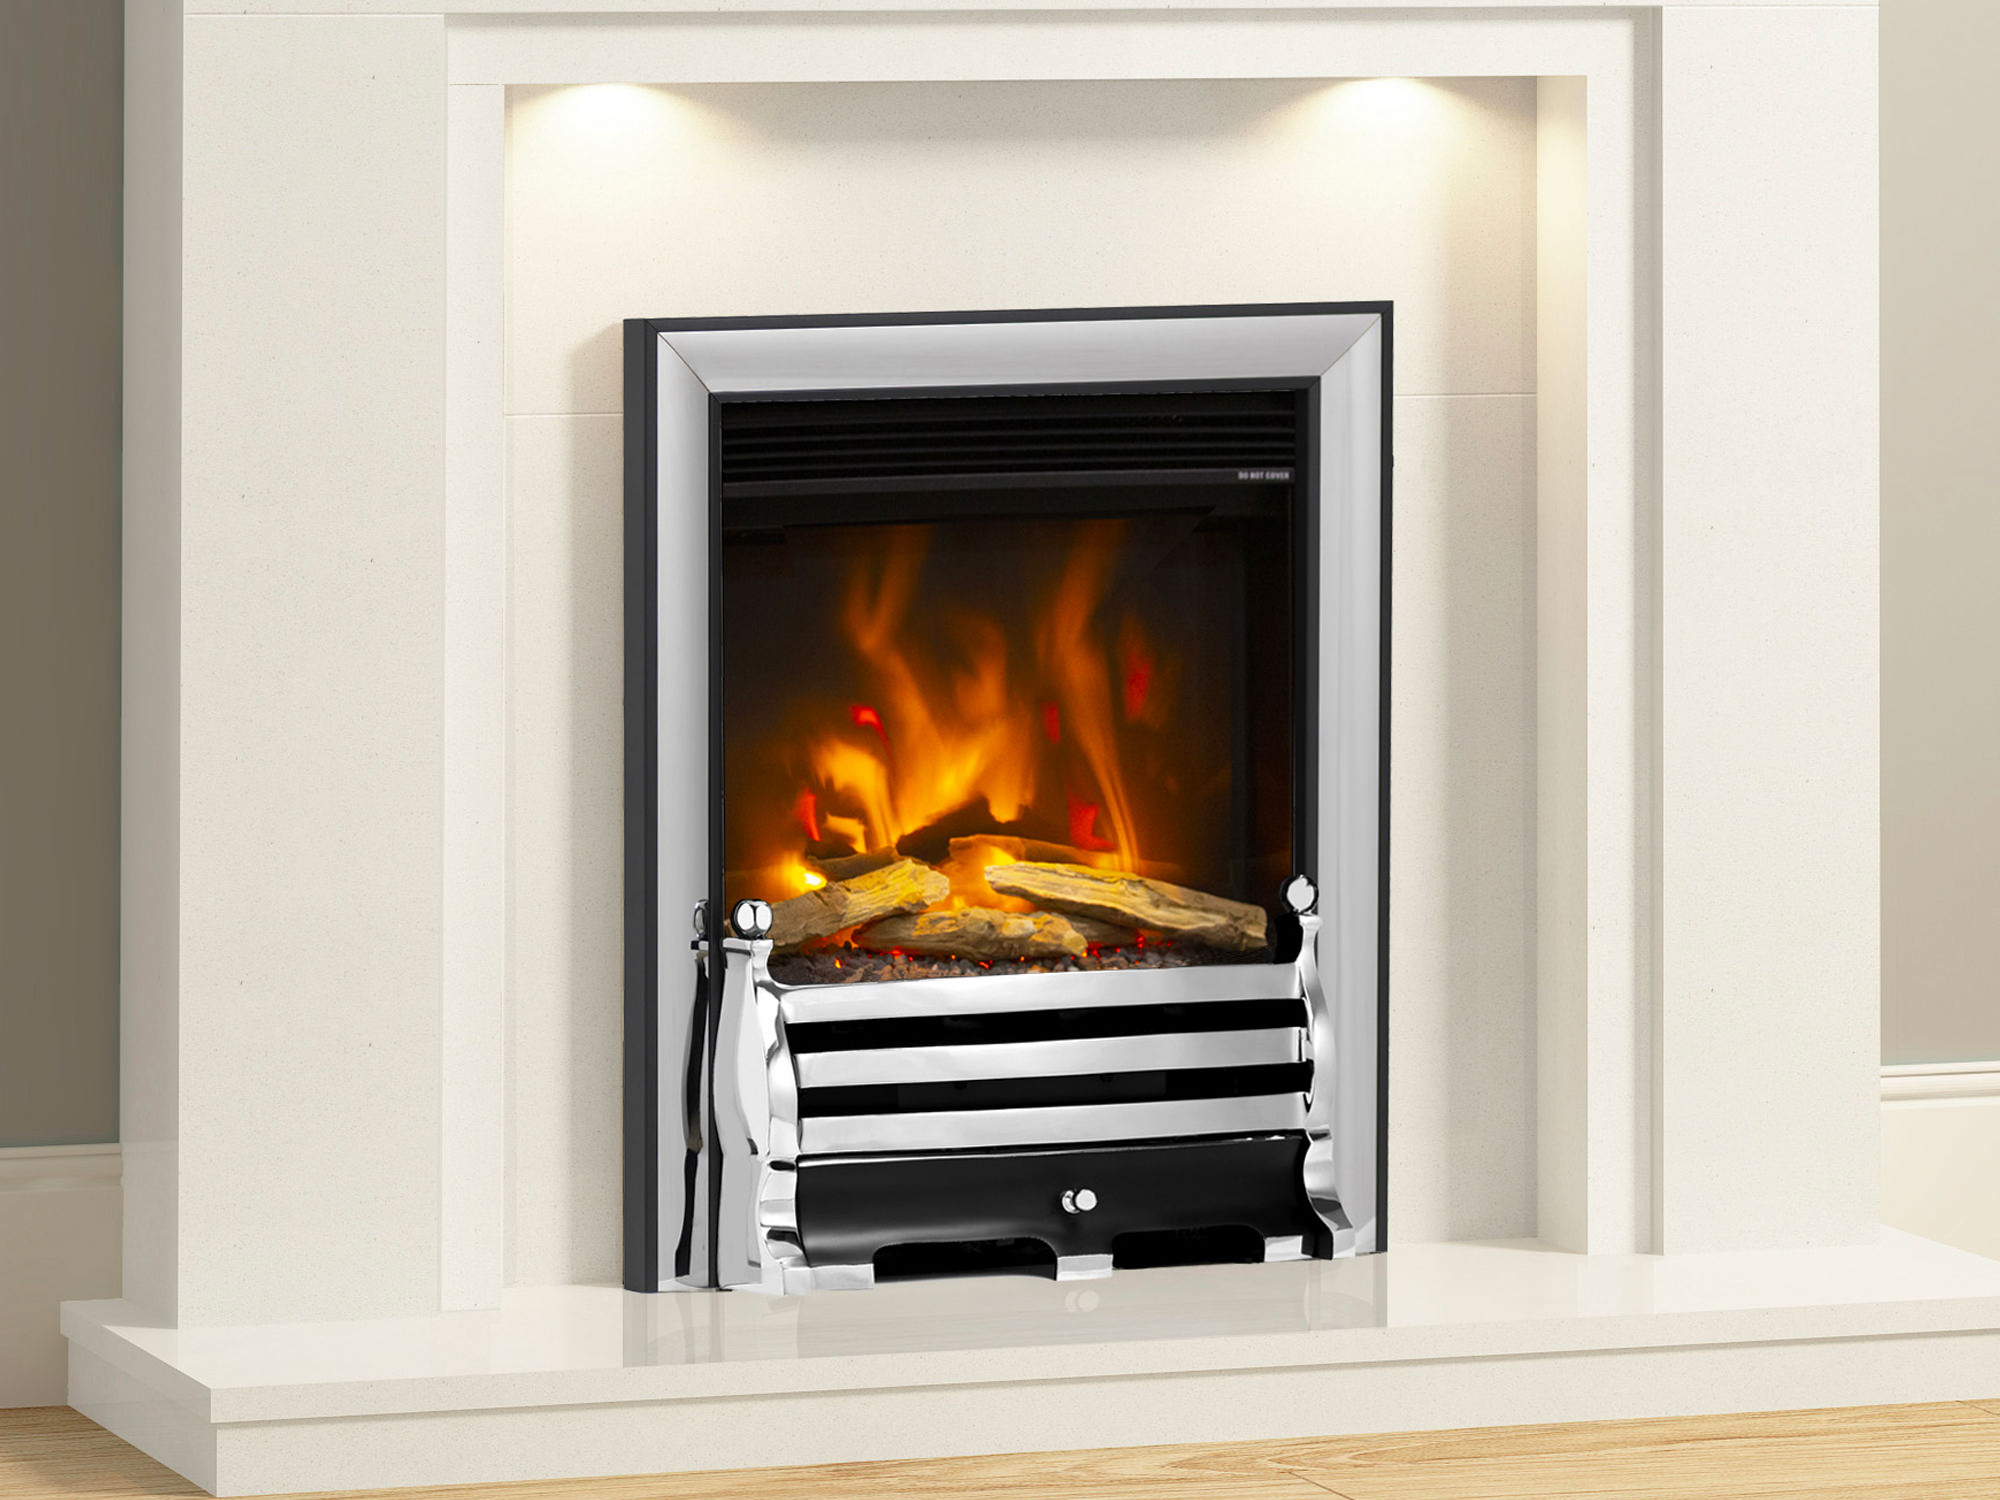 Elgin & Hall Pryzm Devotion with Hampden Fret Electric Fire Chrome and Black